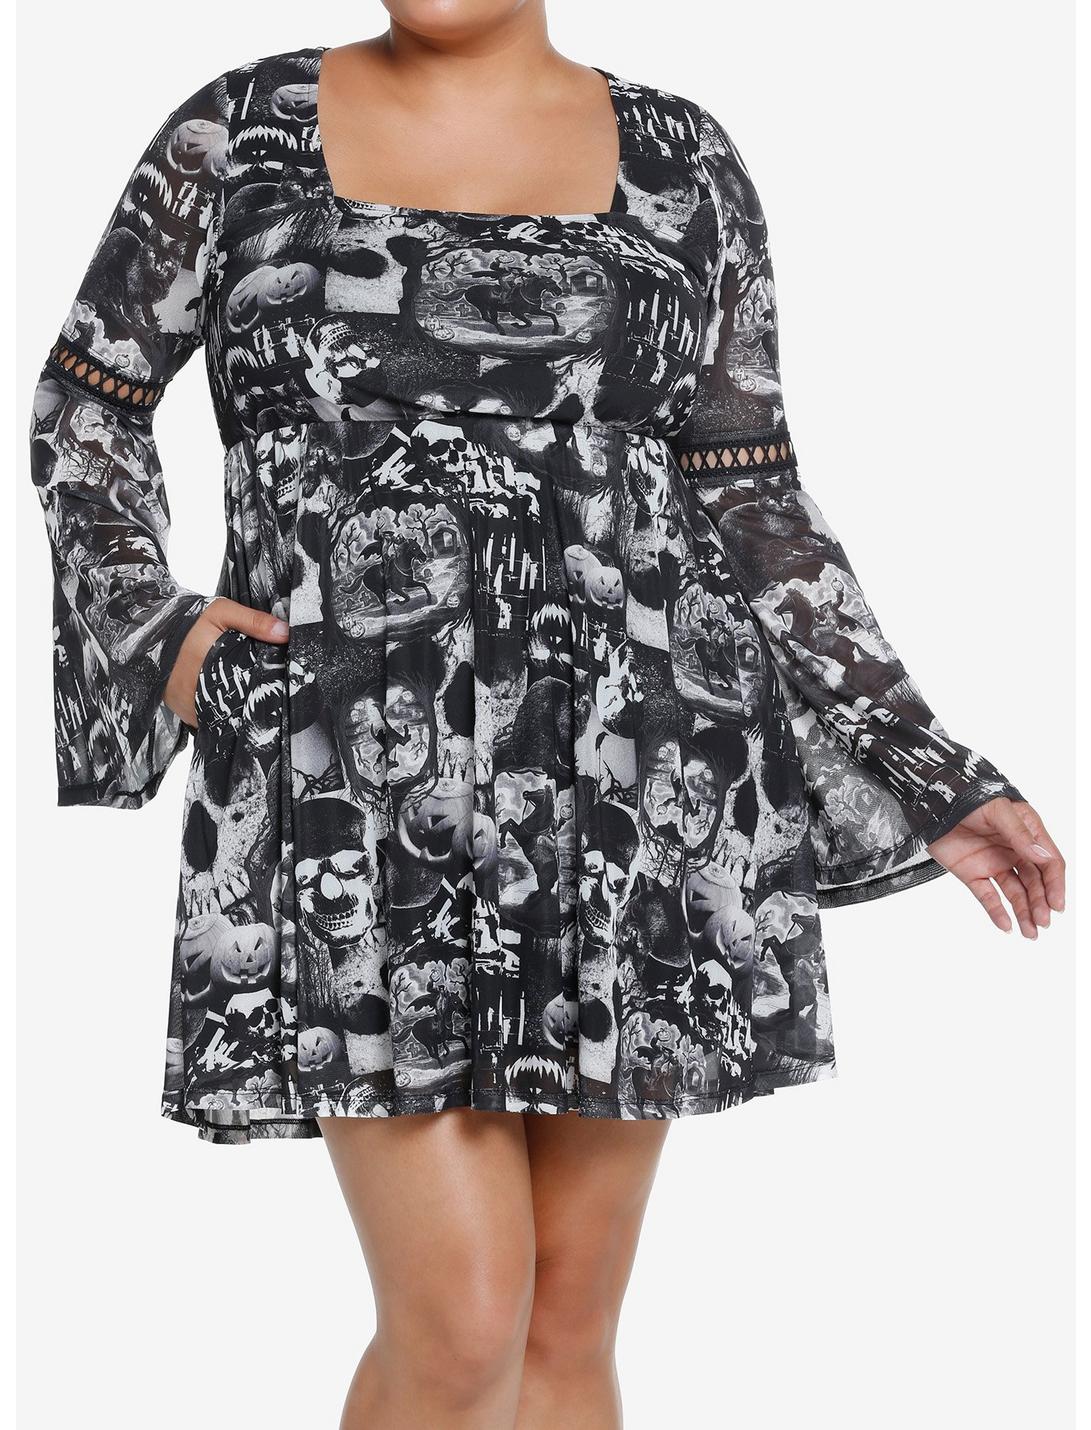 Social Collision Sleepy Hollow Collage Bell Sleeve Dress Plus Size, MULTI, hi-res